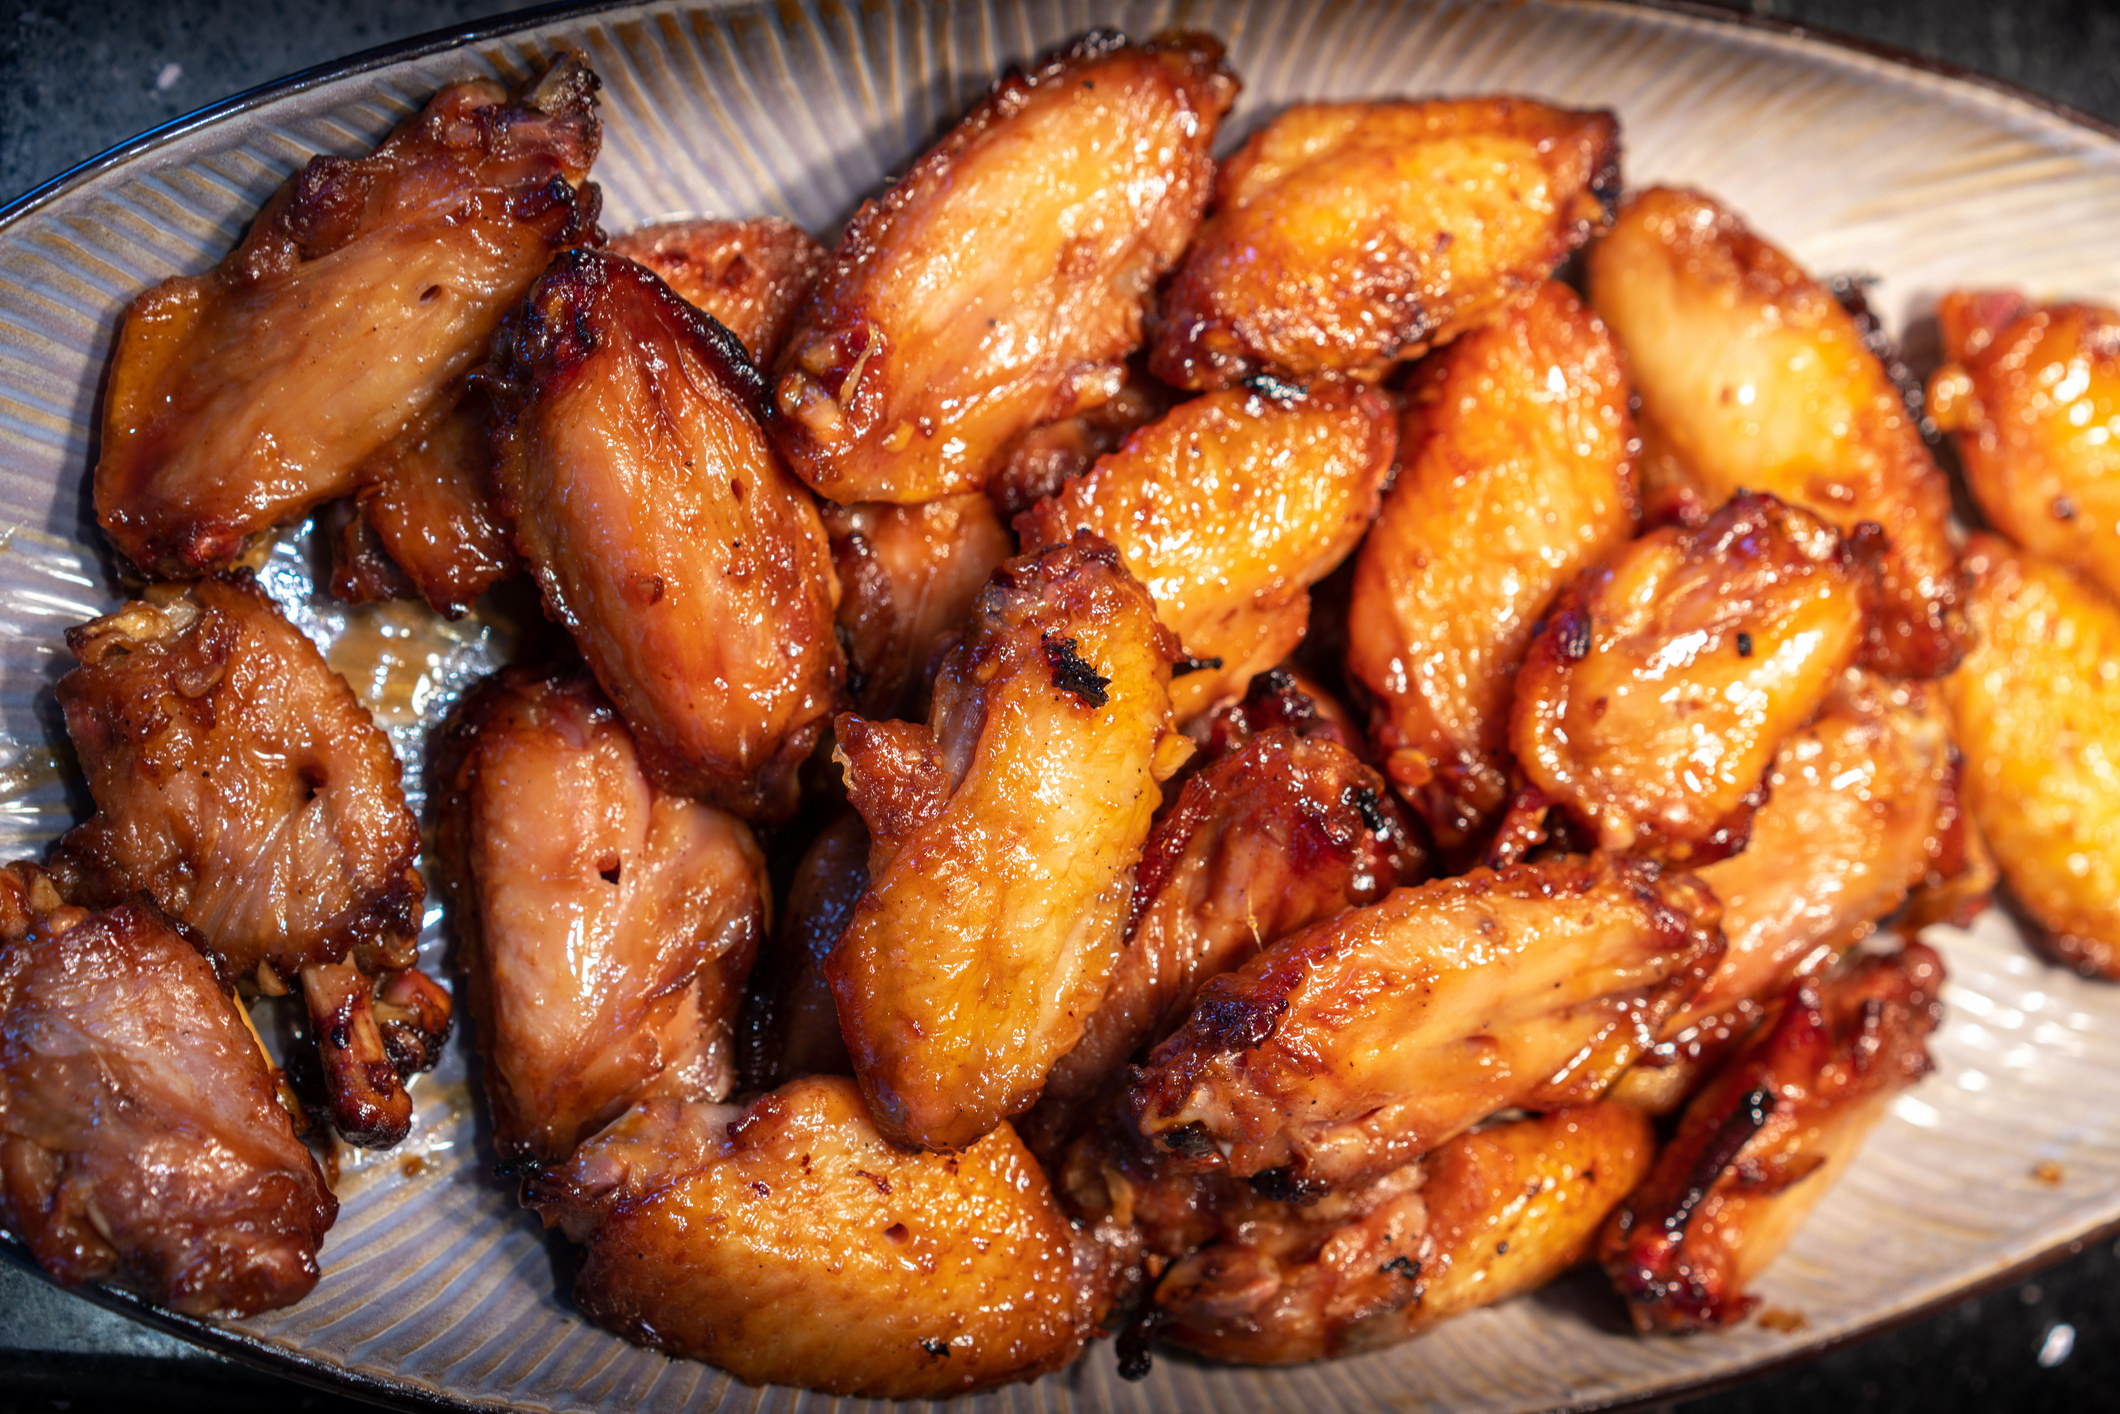 A platter of roasted chicken wings.